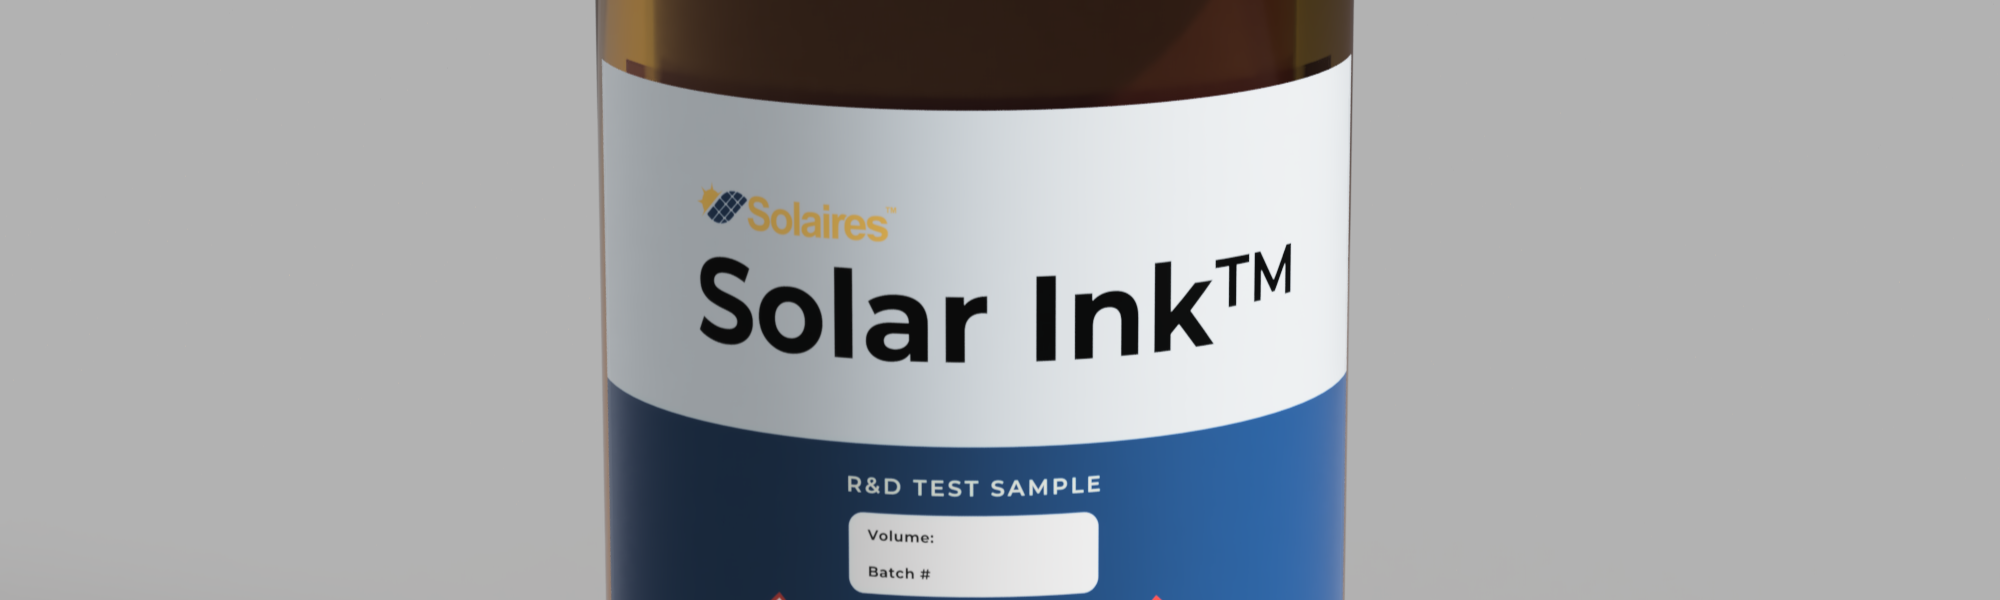 solaires launches commercial perovskite